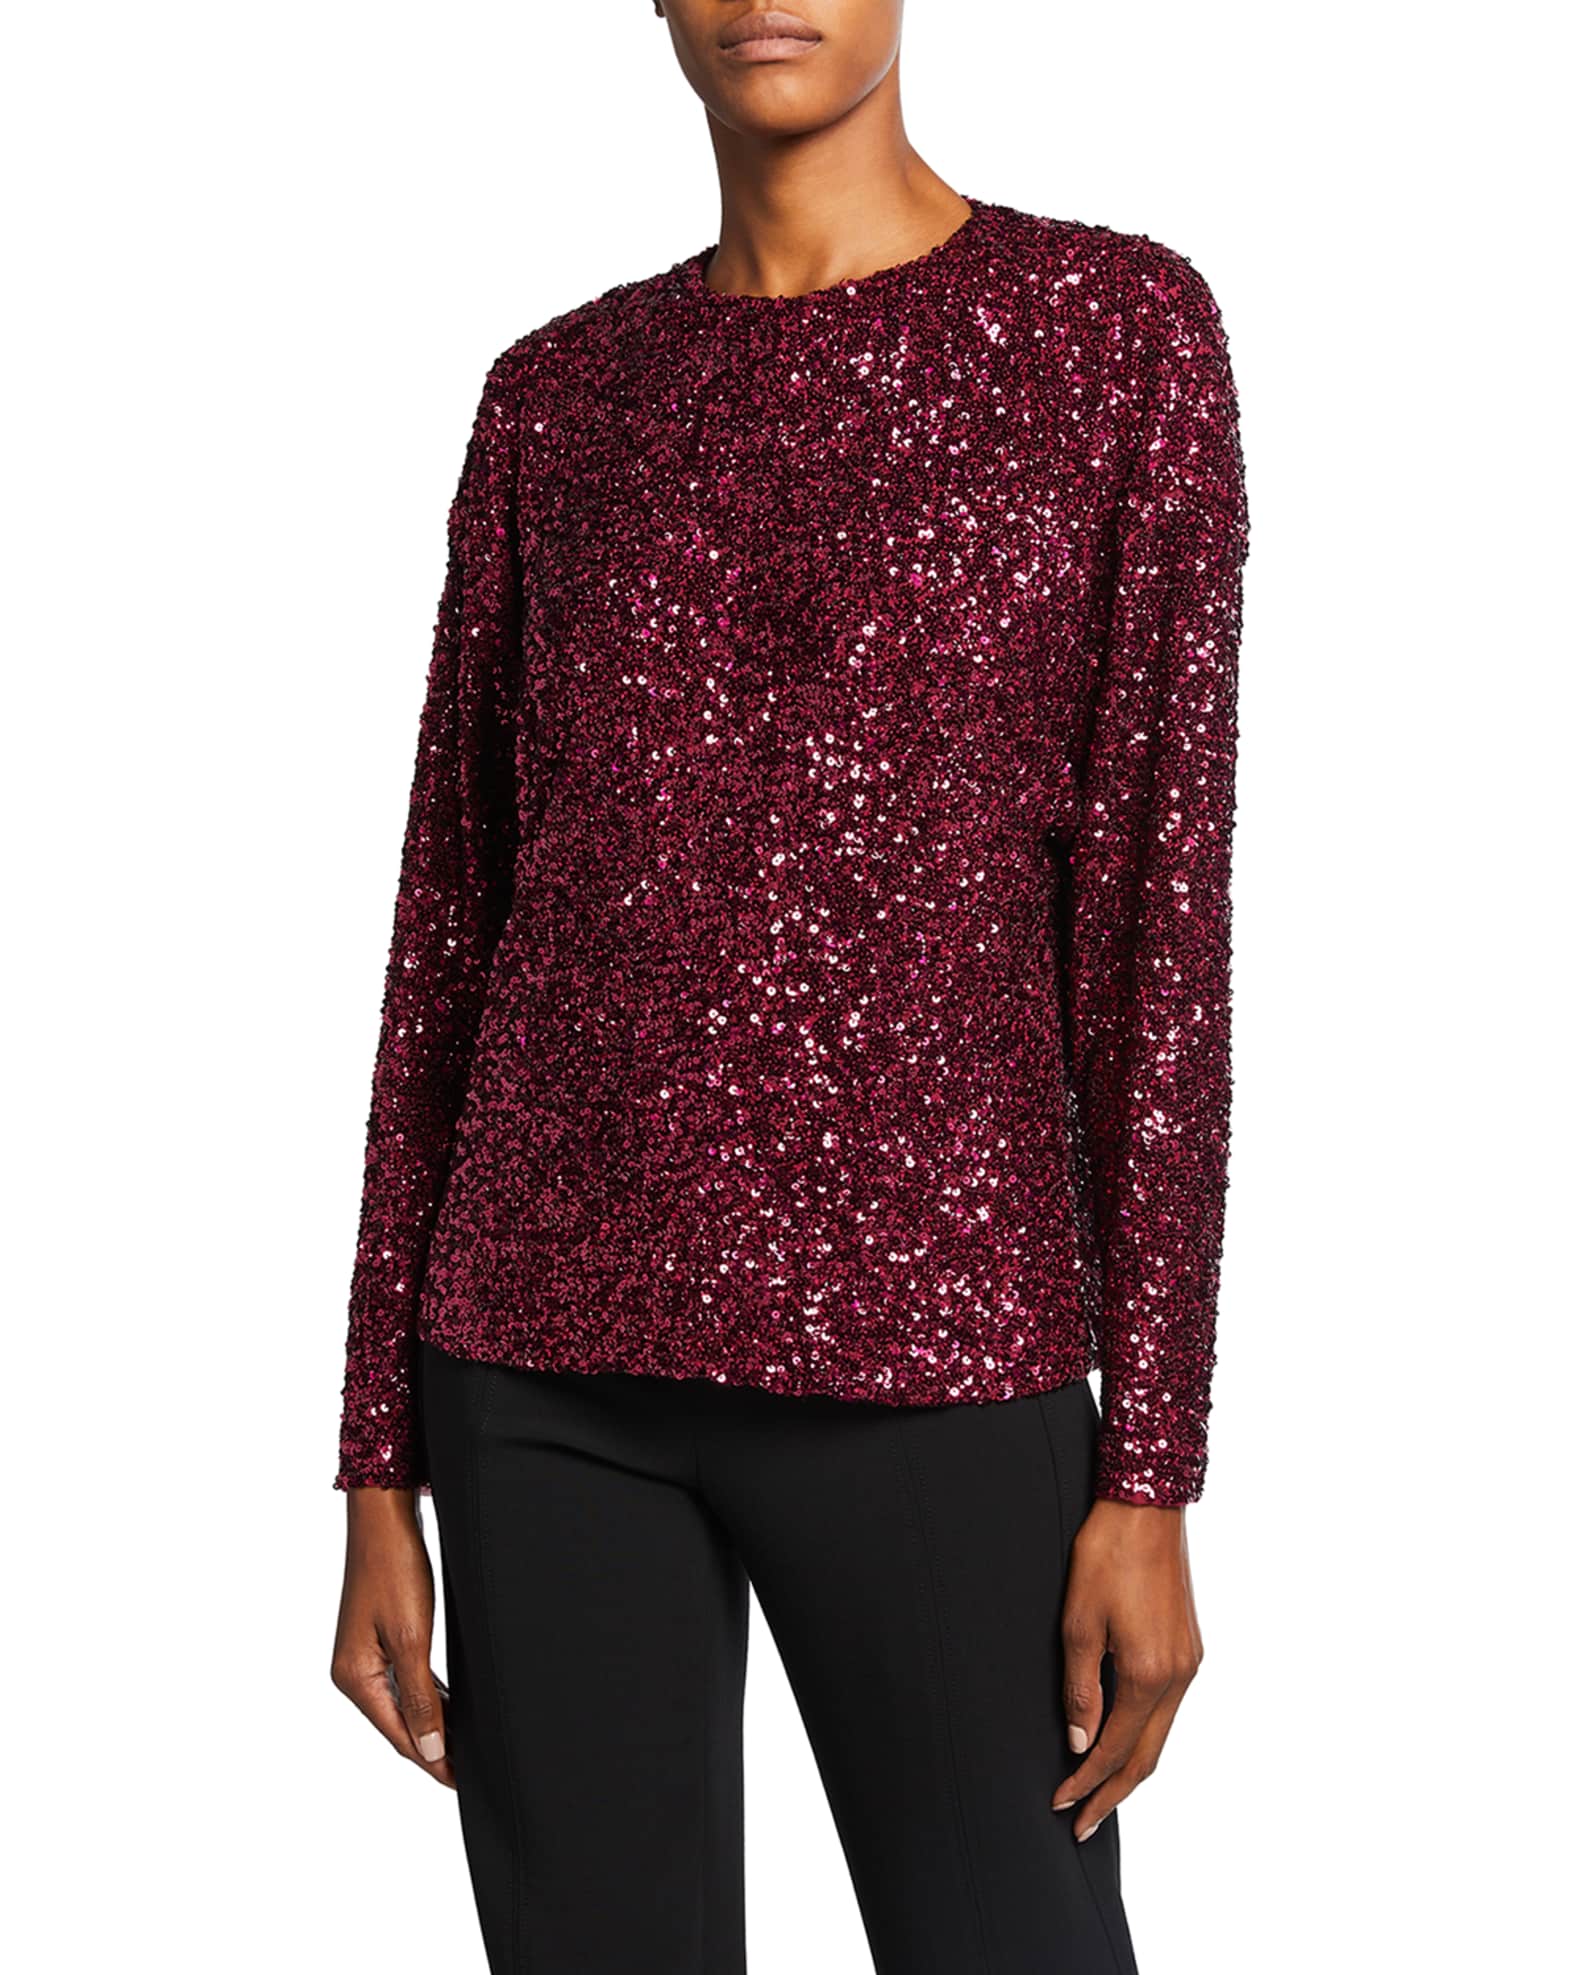 Lorelle Sequined Top and Matching Items | Neiman Marcus